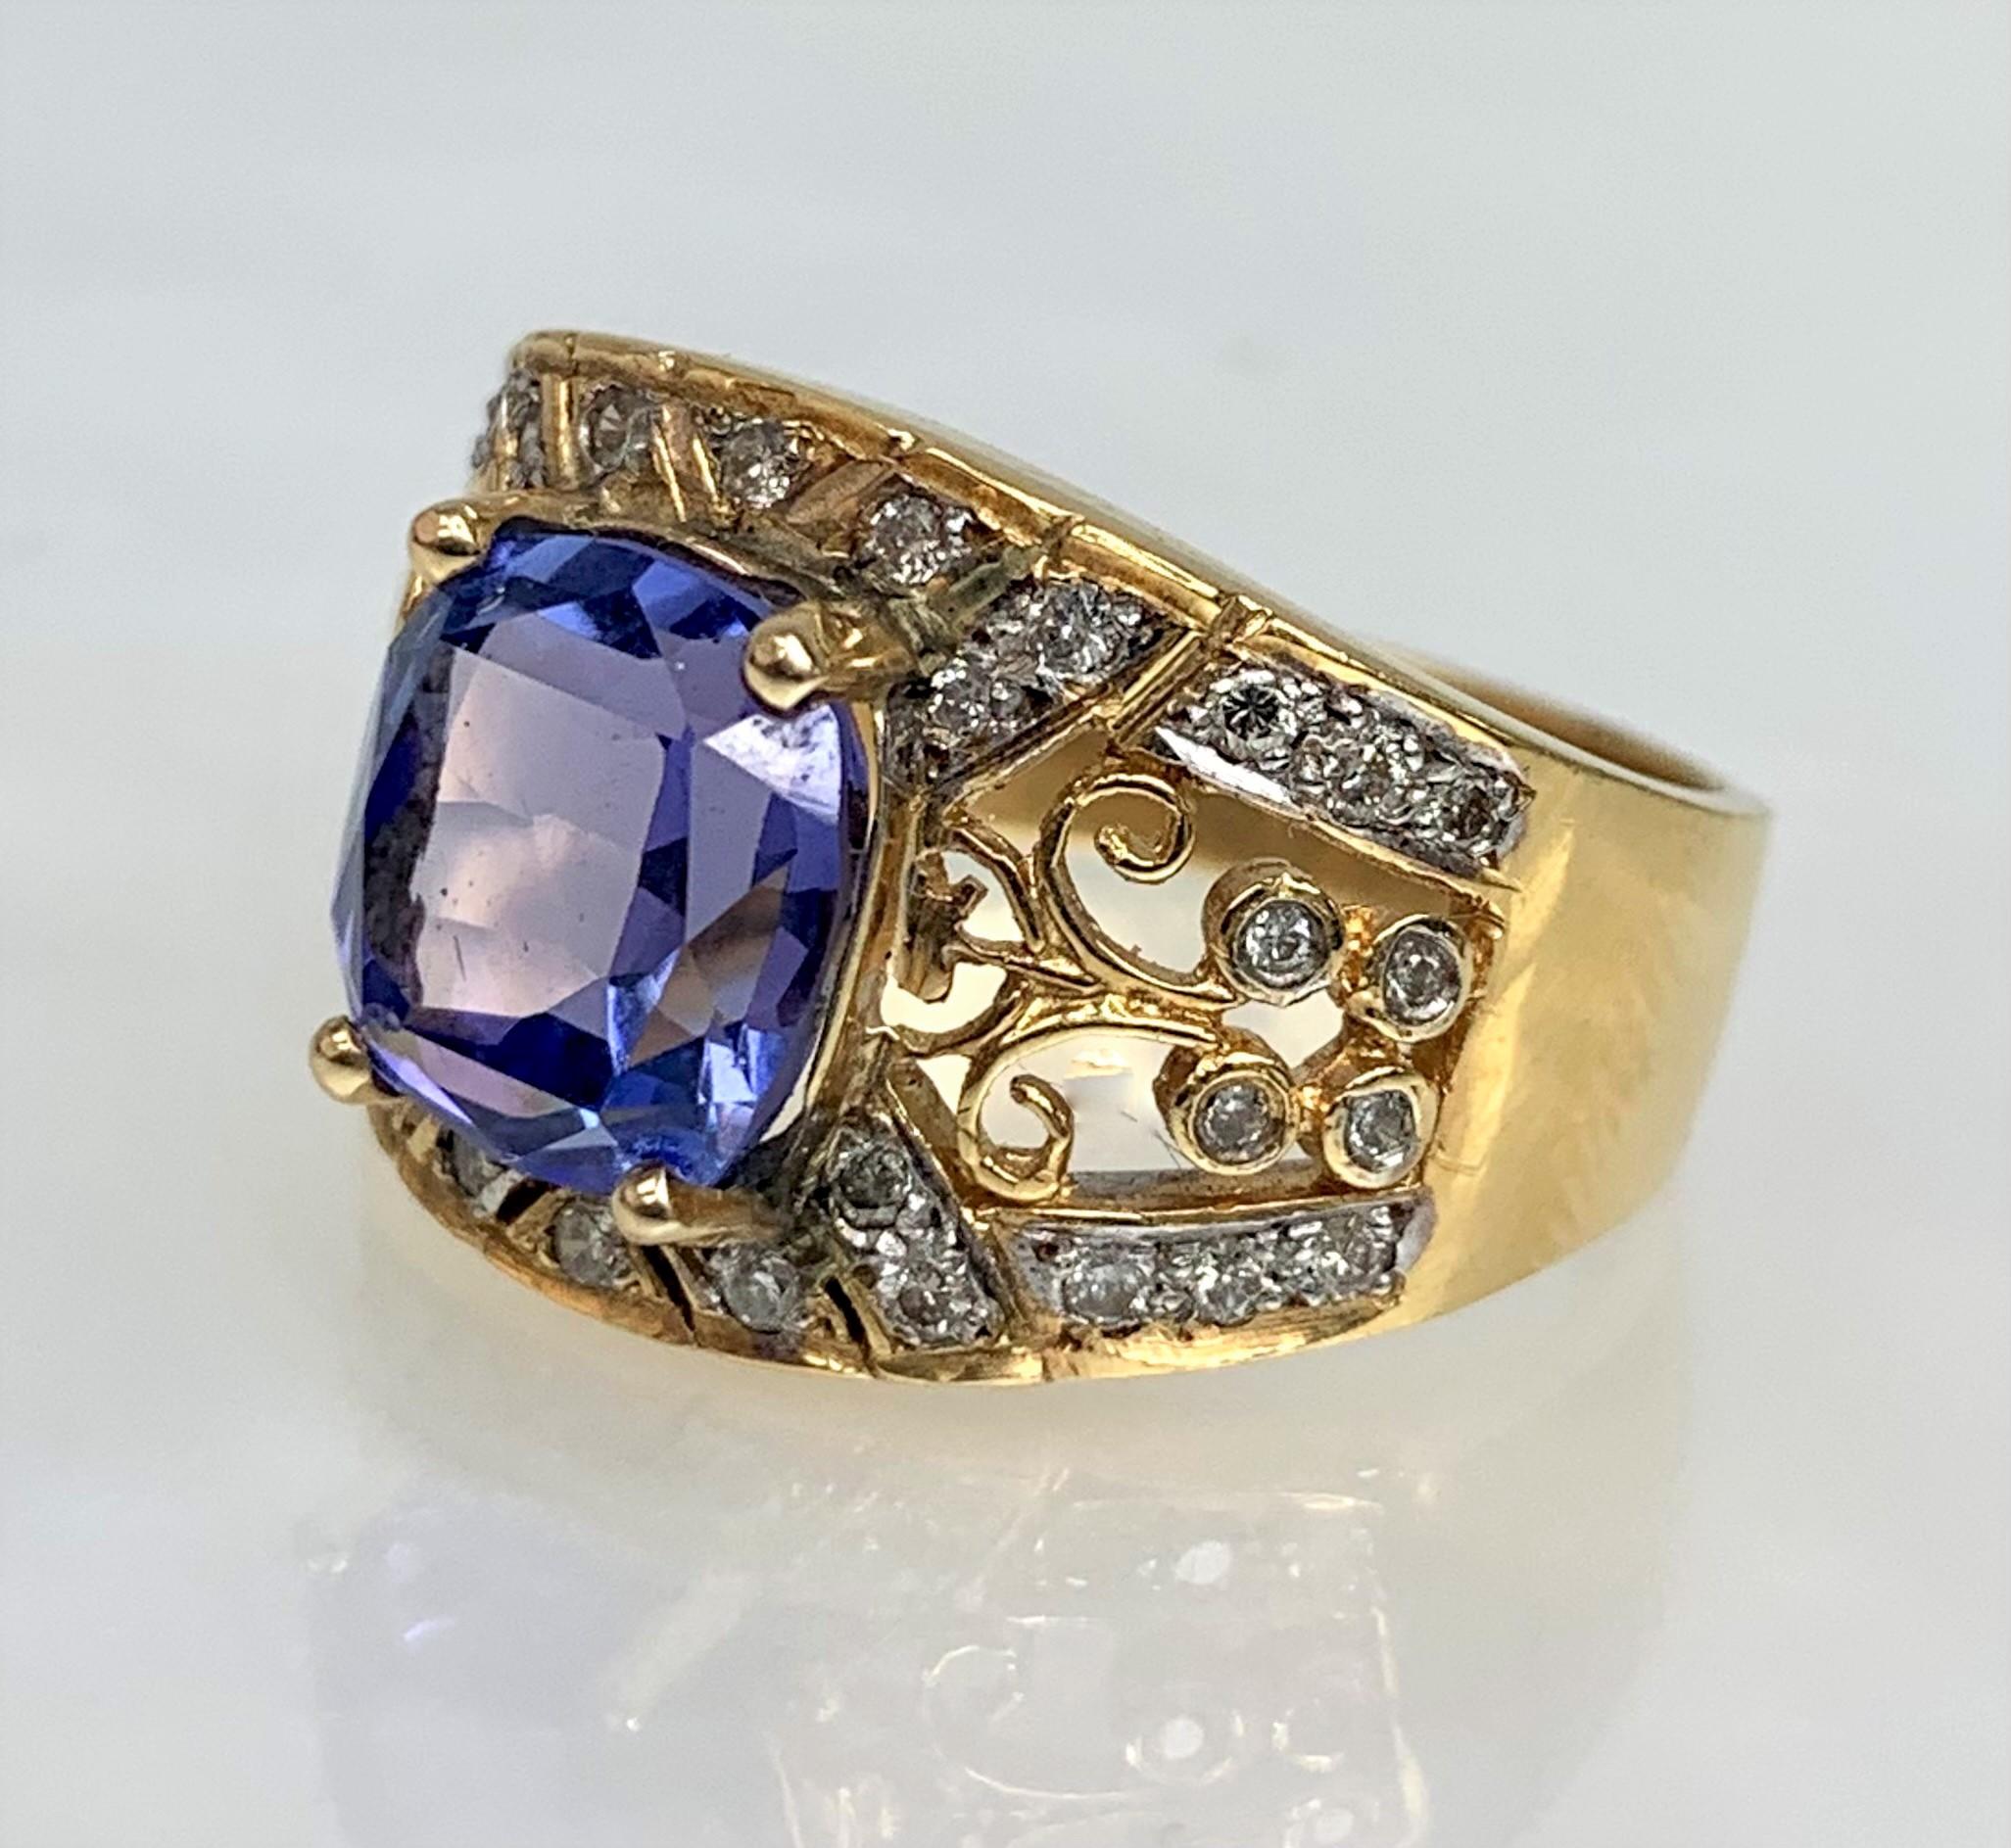 A divine vintage tanzanite ring featuring a 3.90 carat cushion cut center stone surrounded by 0.32 carats of white diamonds set in solid 18k yellow gold with detailed filigree workmanship.

*Approximate stone measurements:
Height: 9mm
Width: